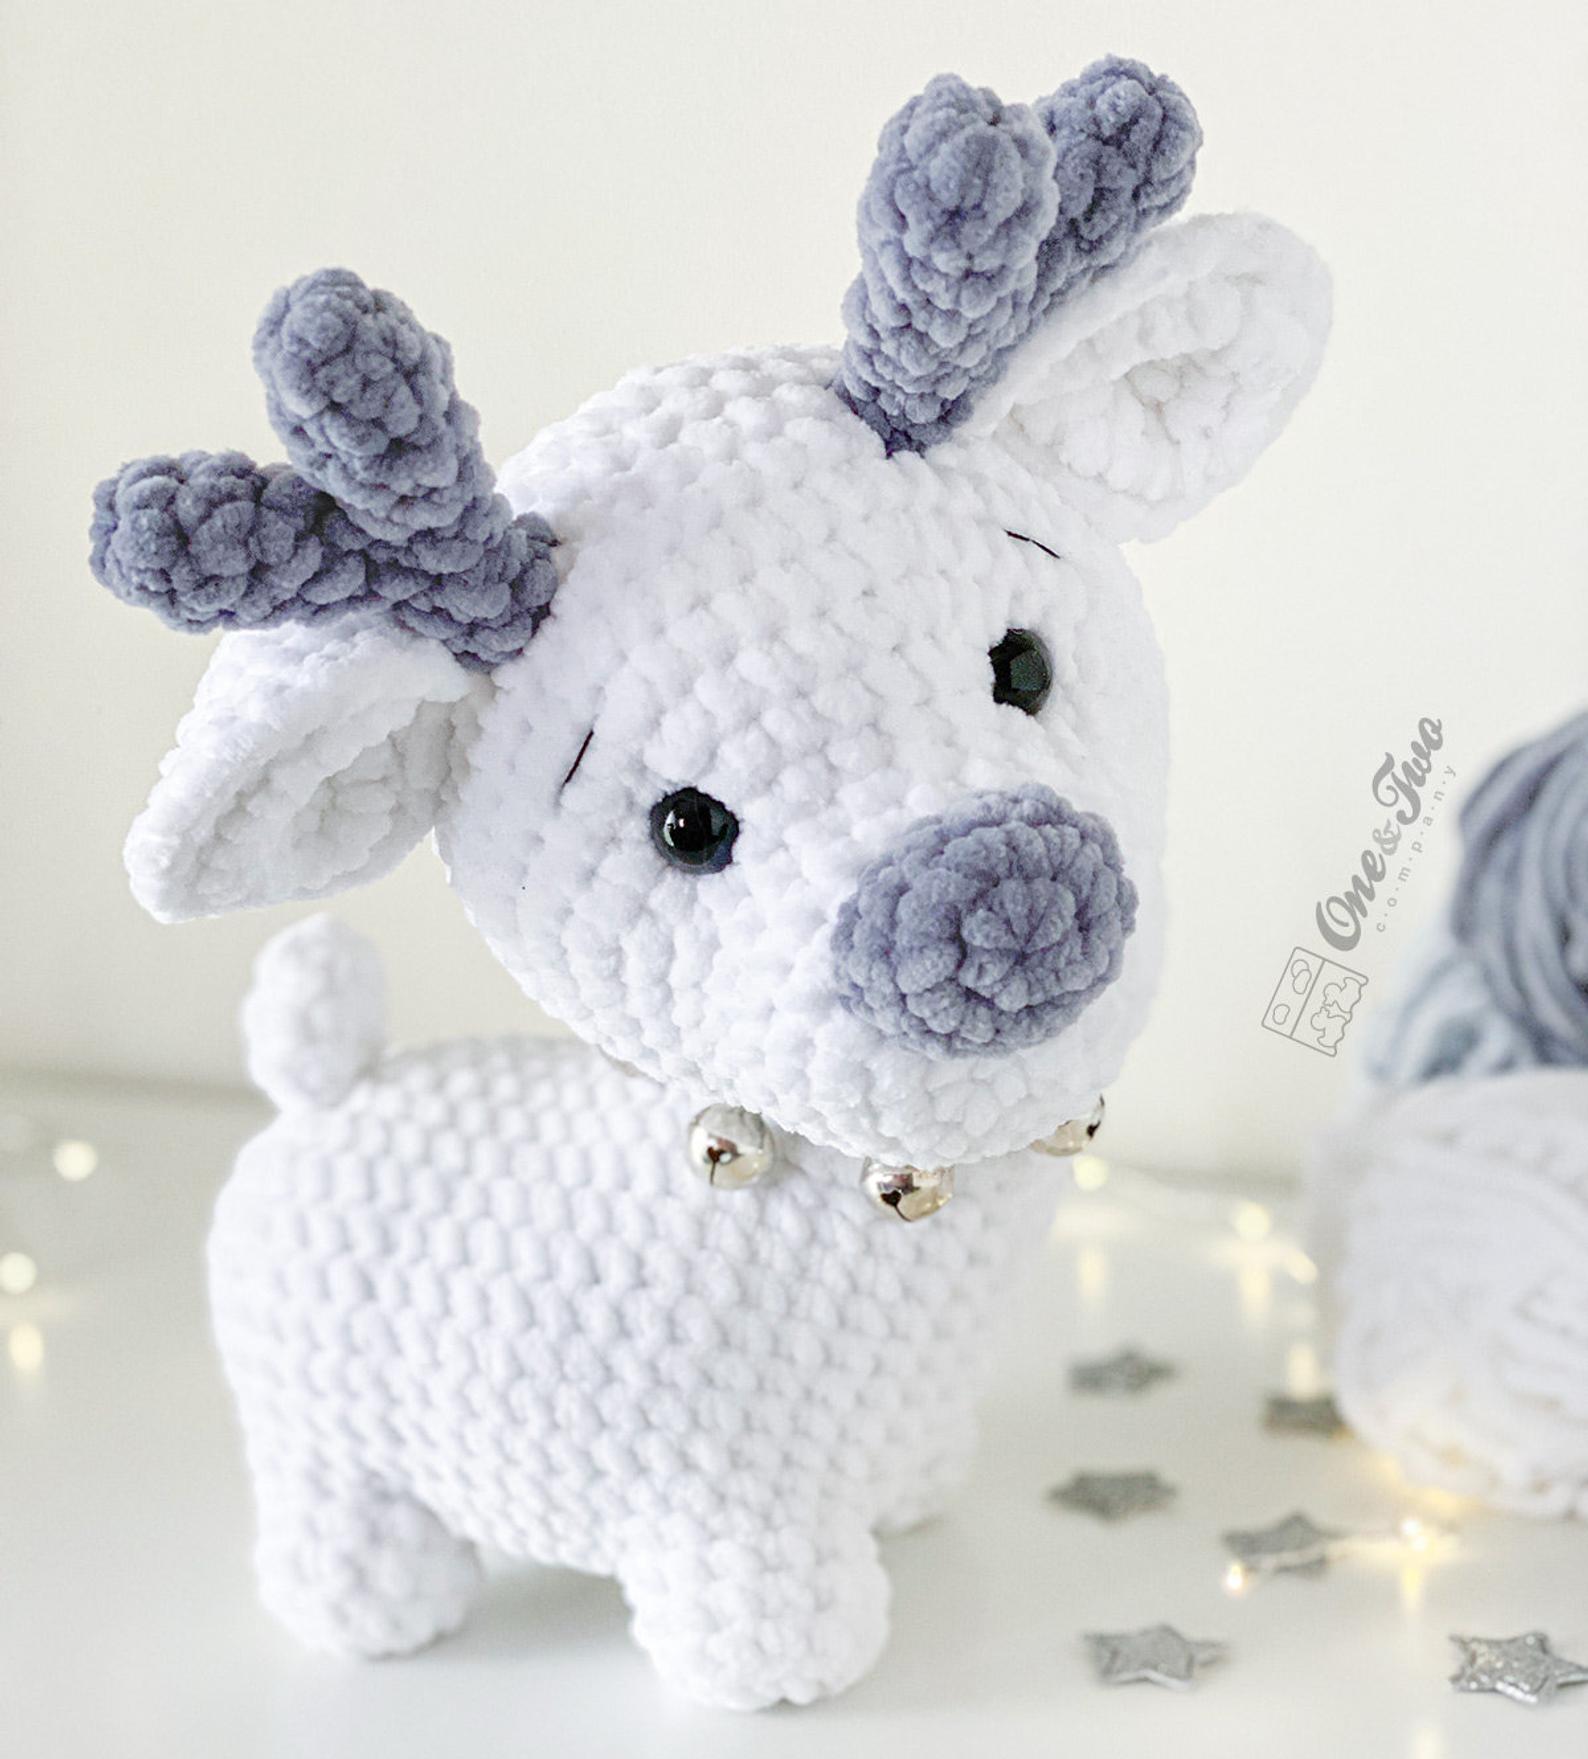 Adorable crochet reindeer would make a great holiday gift